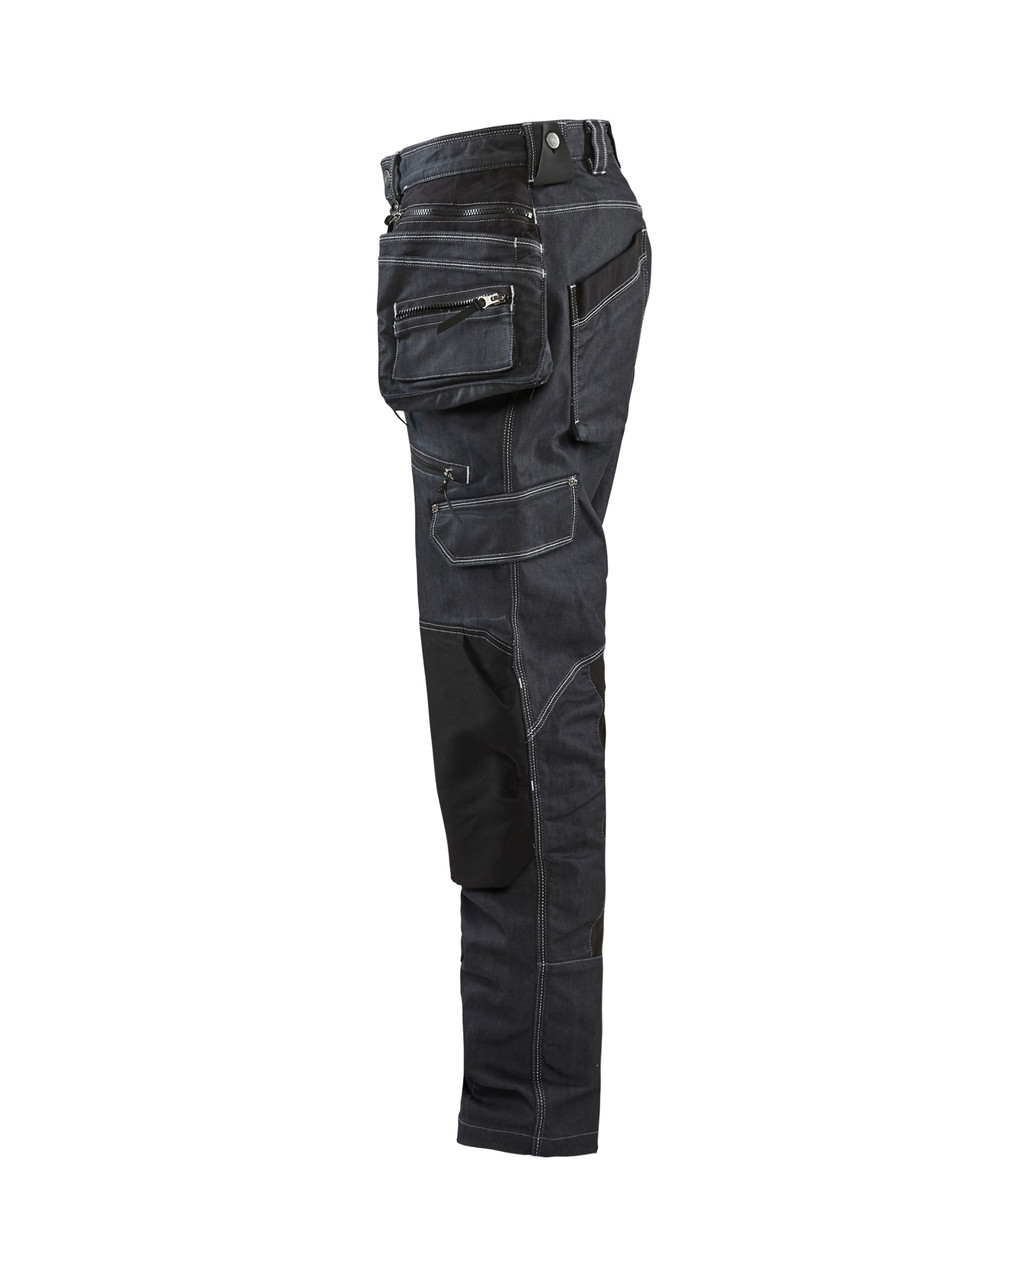 BLAKLADER Work Pants  | Look at Trousers 1999 for Mens Work Trousers and Work Pants with Holster Pockets in Sydney, Melbourne and Perth